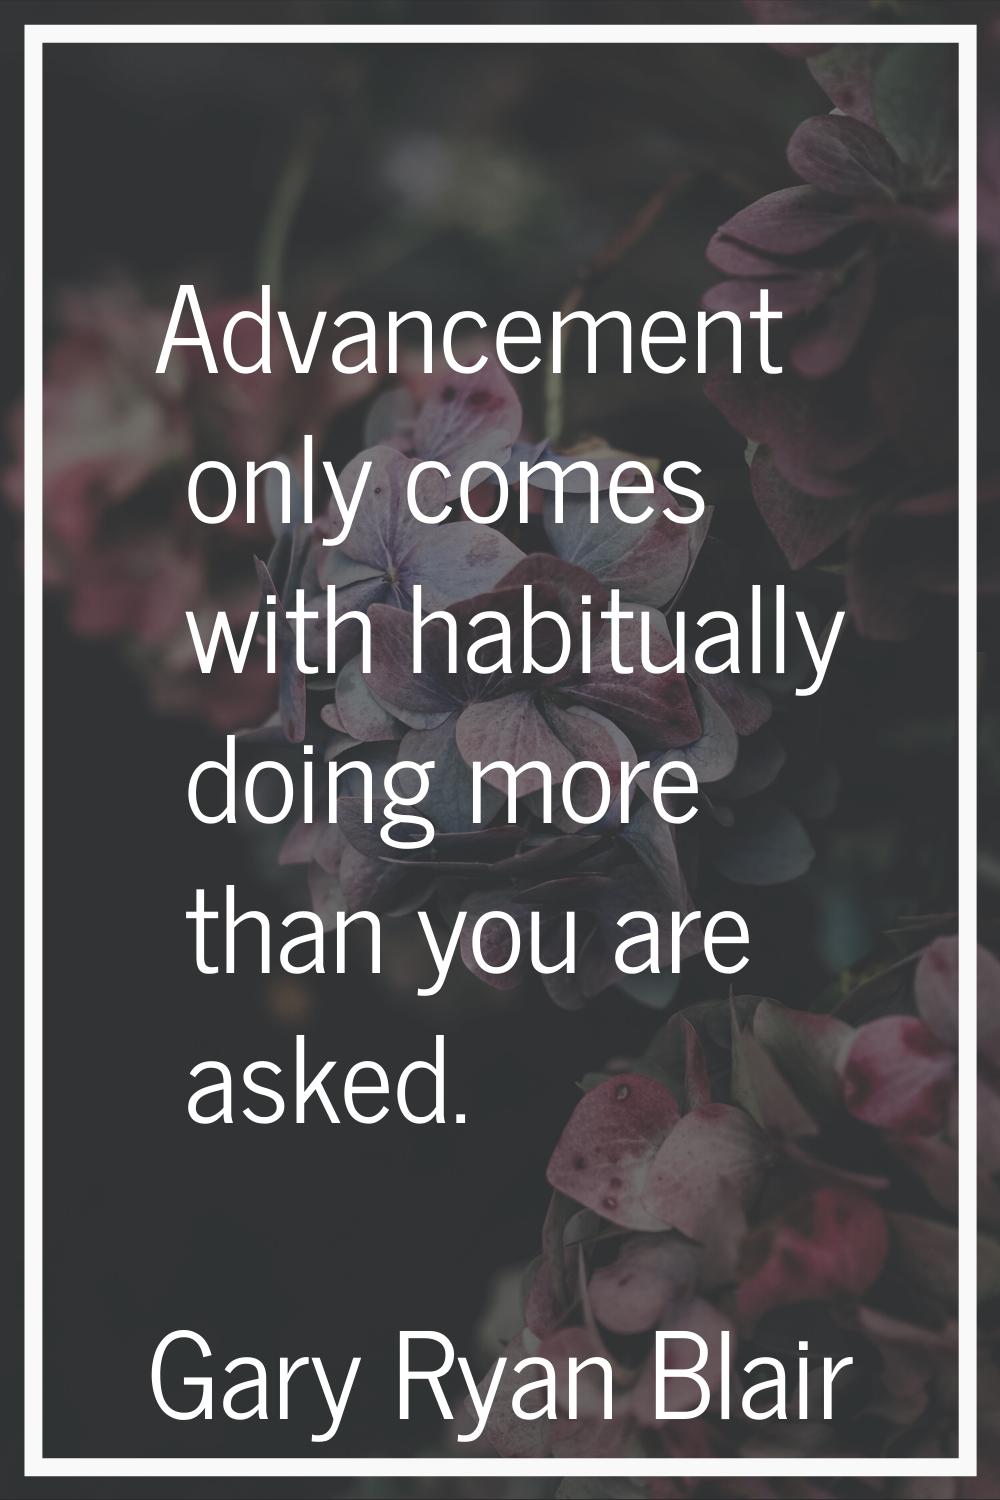 Advancement only comes with habitually doing more than you are asked.